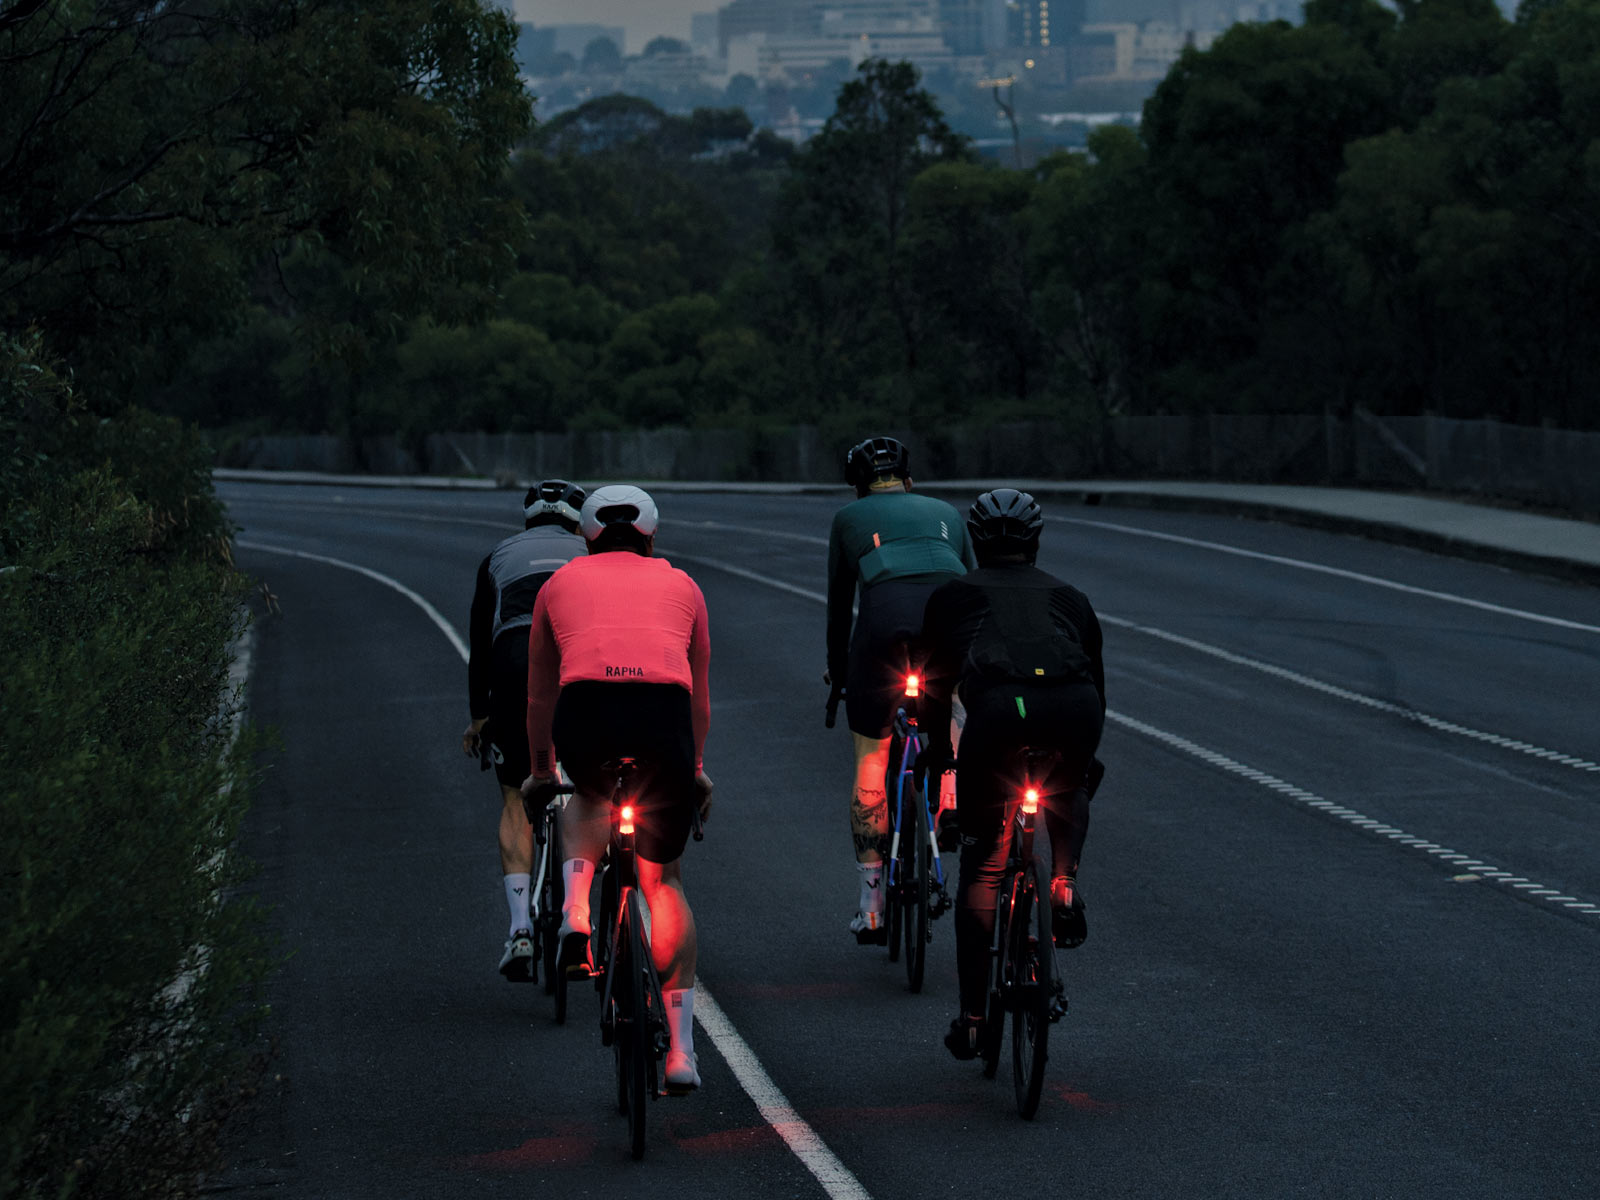 Project Flock Light unique biomotion increased visibility cycling taillight, group ride